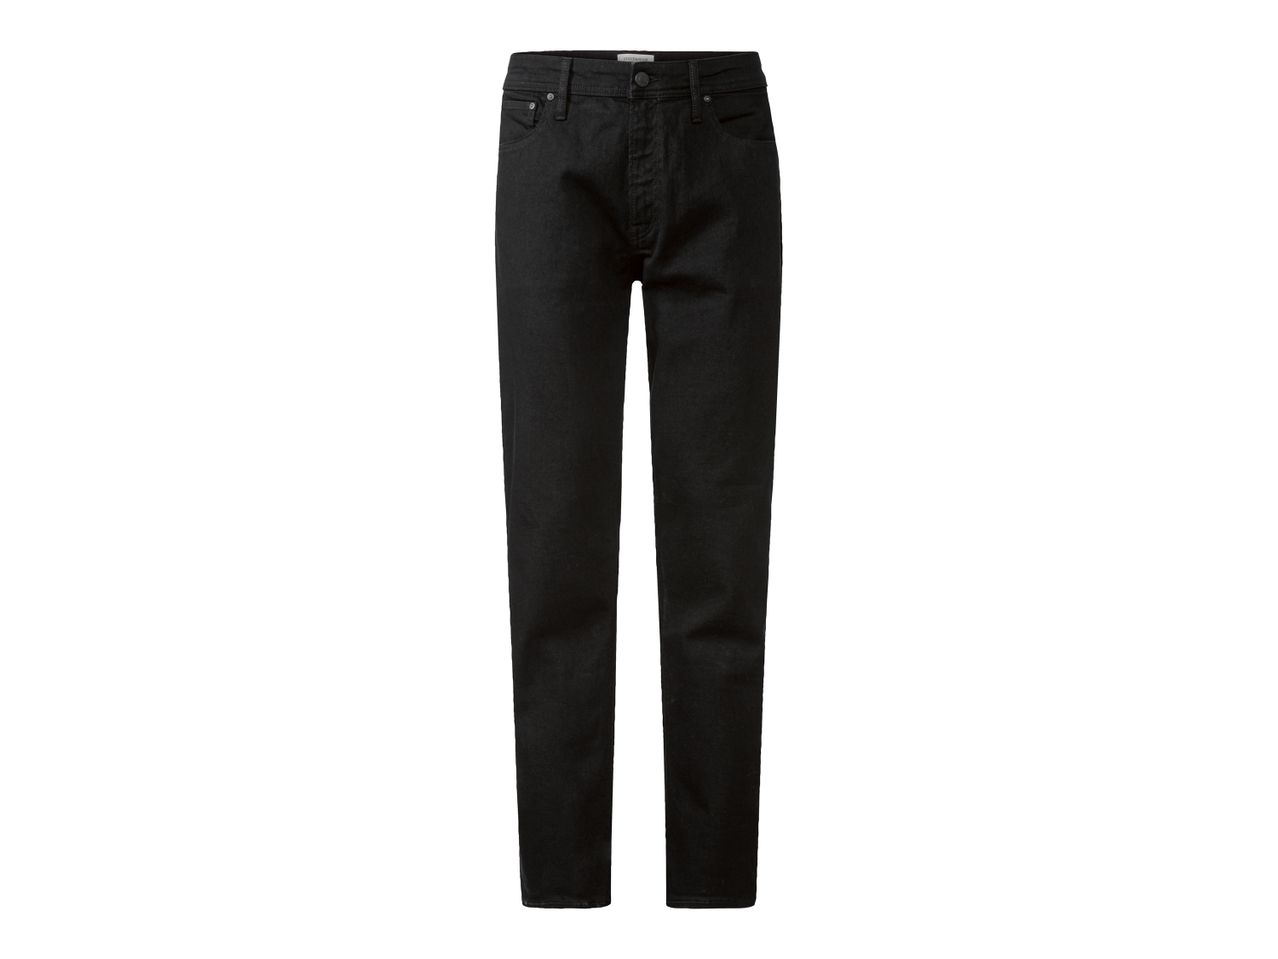 Go to full screen view: Men's Jeans Reg Fit - Image 1